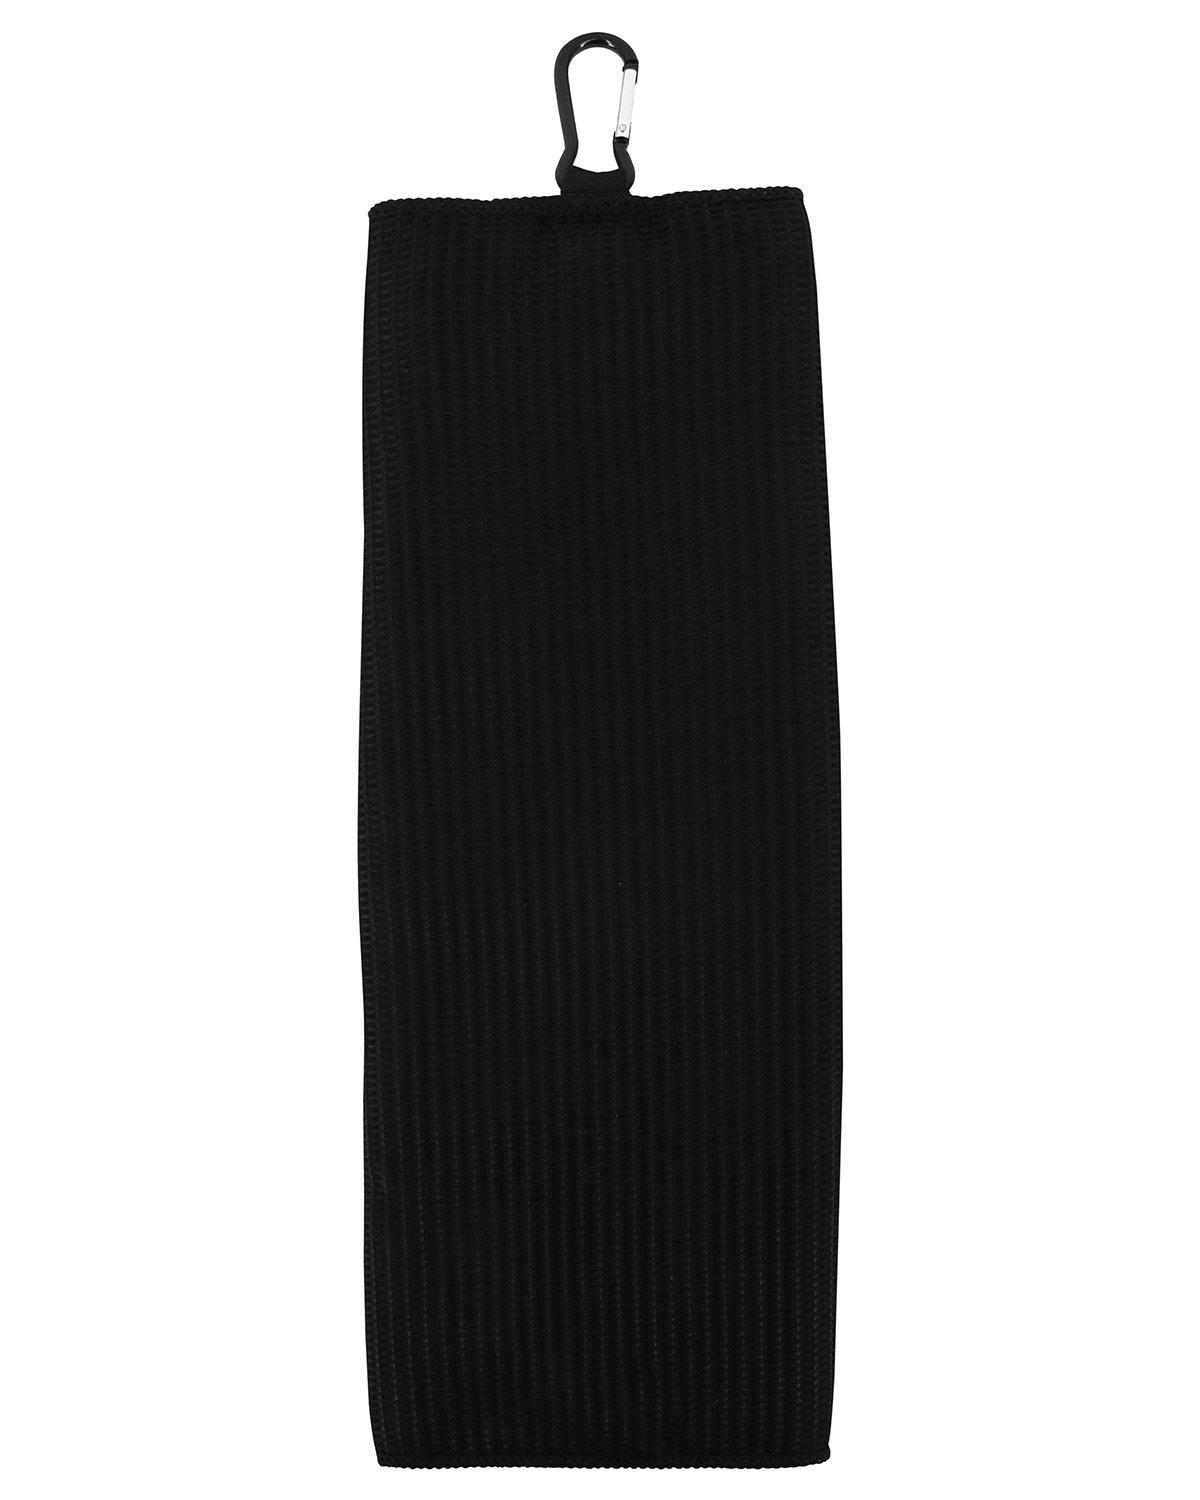 Image for Fairway Trifold Golf Towel